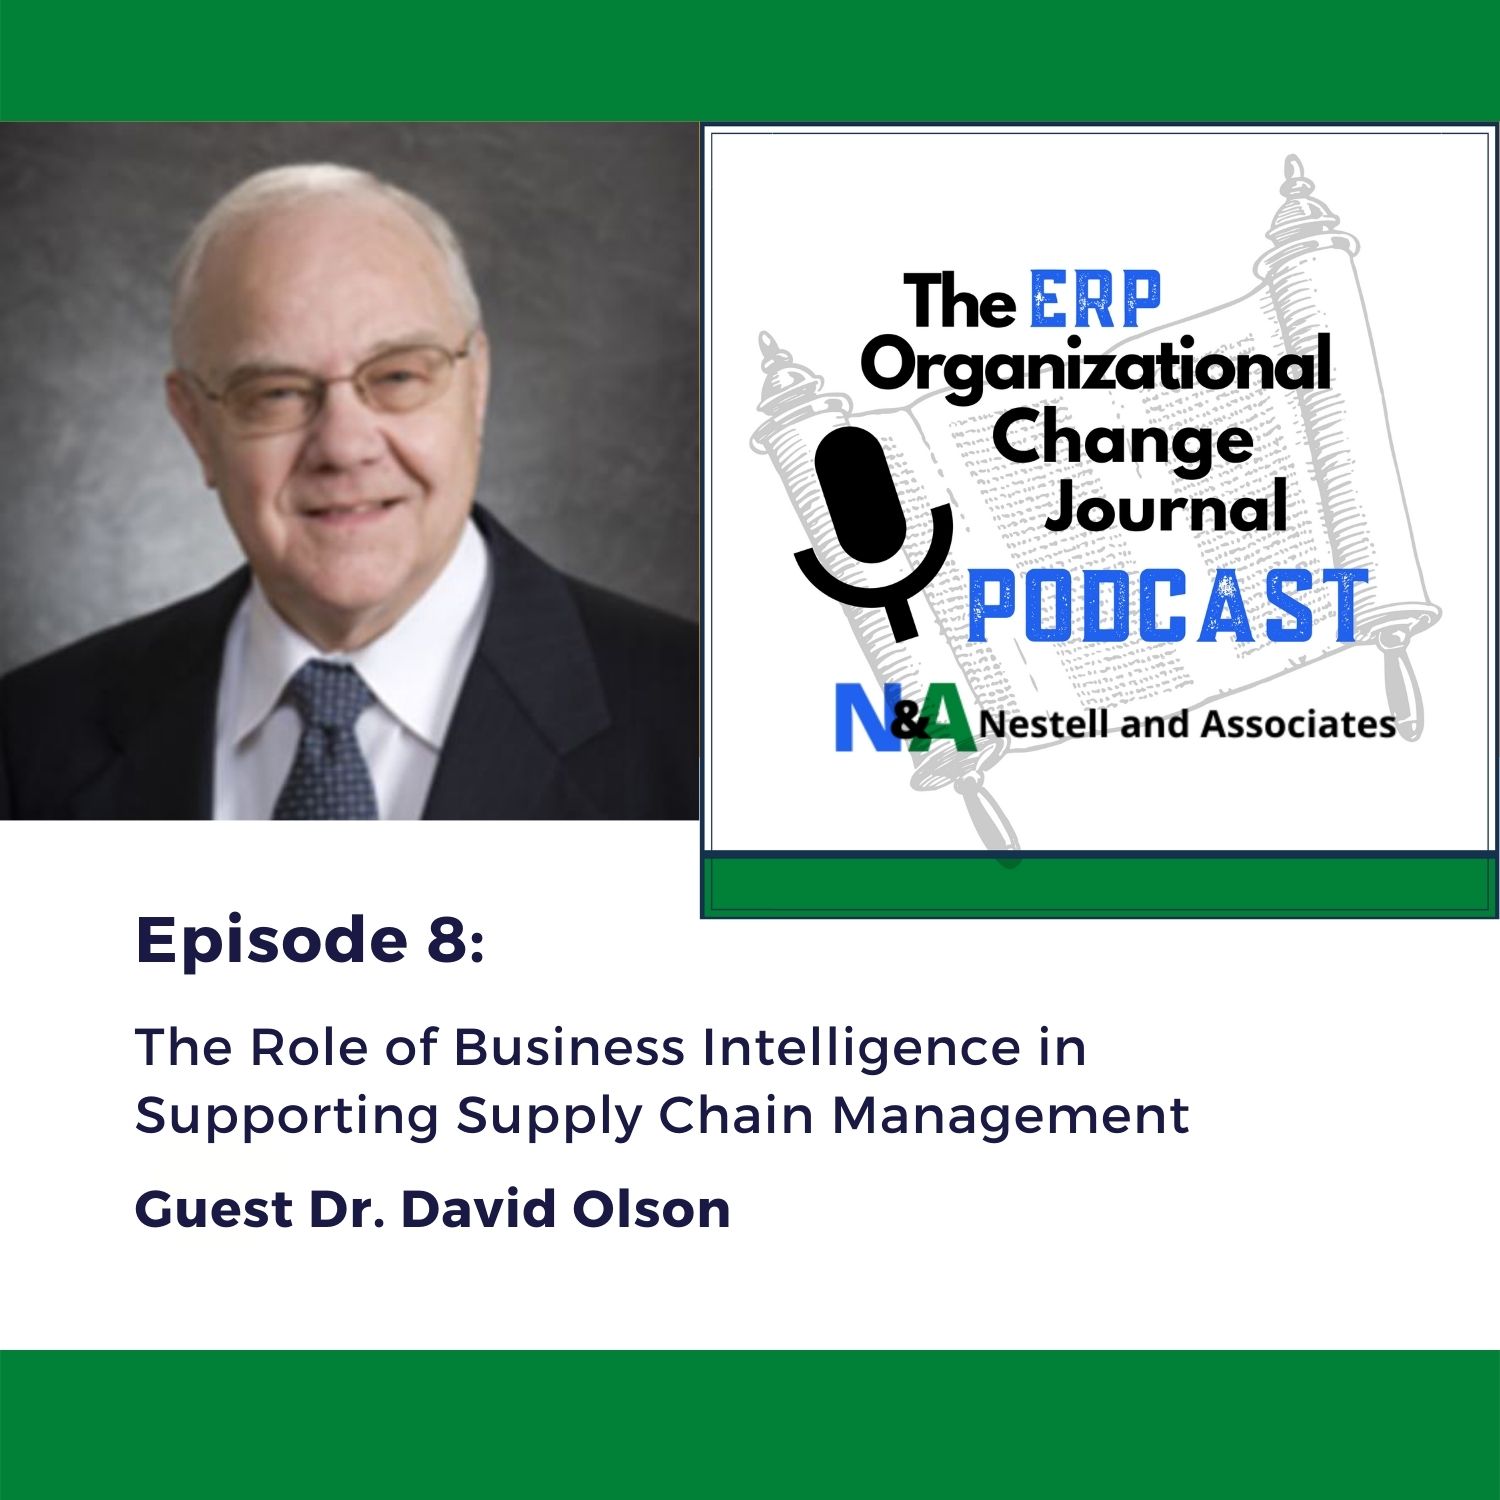 Episode 8 The Role of Business Intelligence in Supporting Supply Chain Management Guest Dr. David Olson